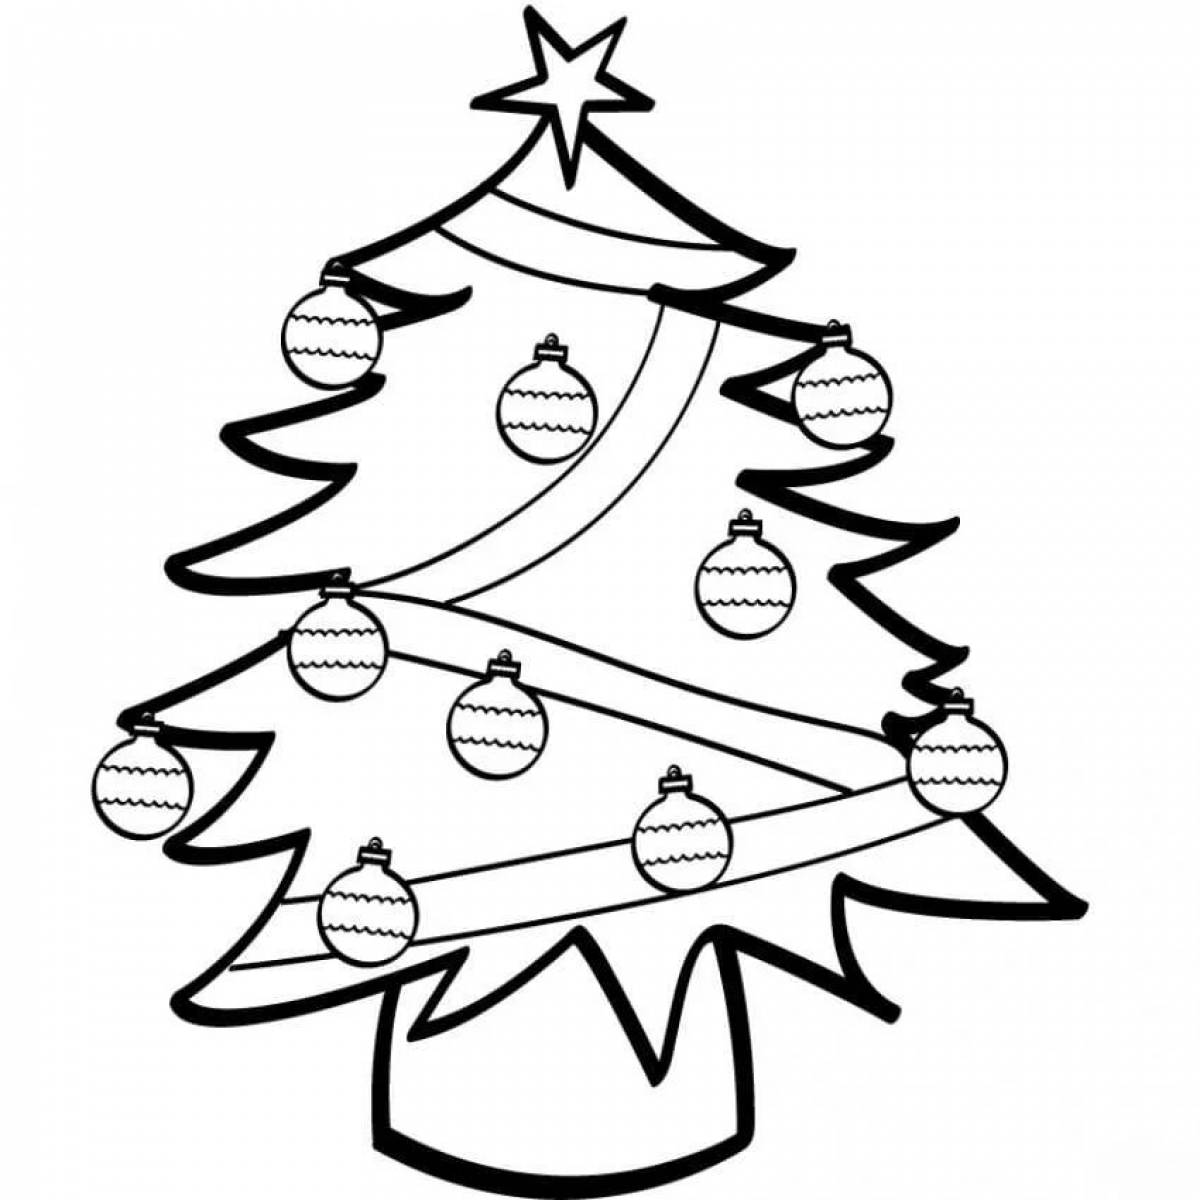 Coloring book brightly lit Christmas tree